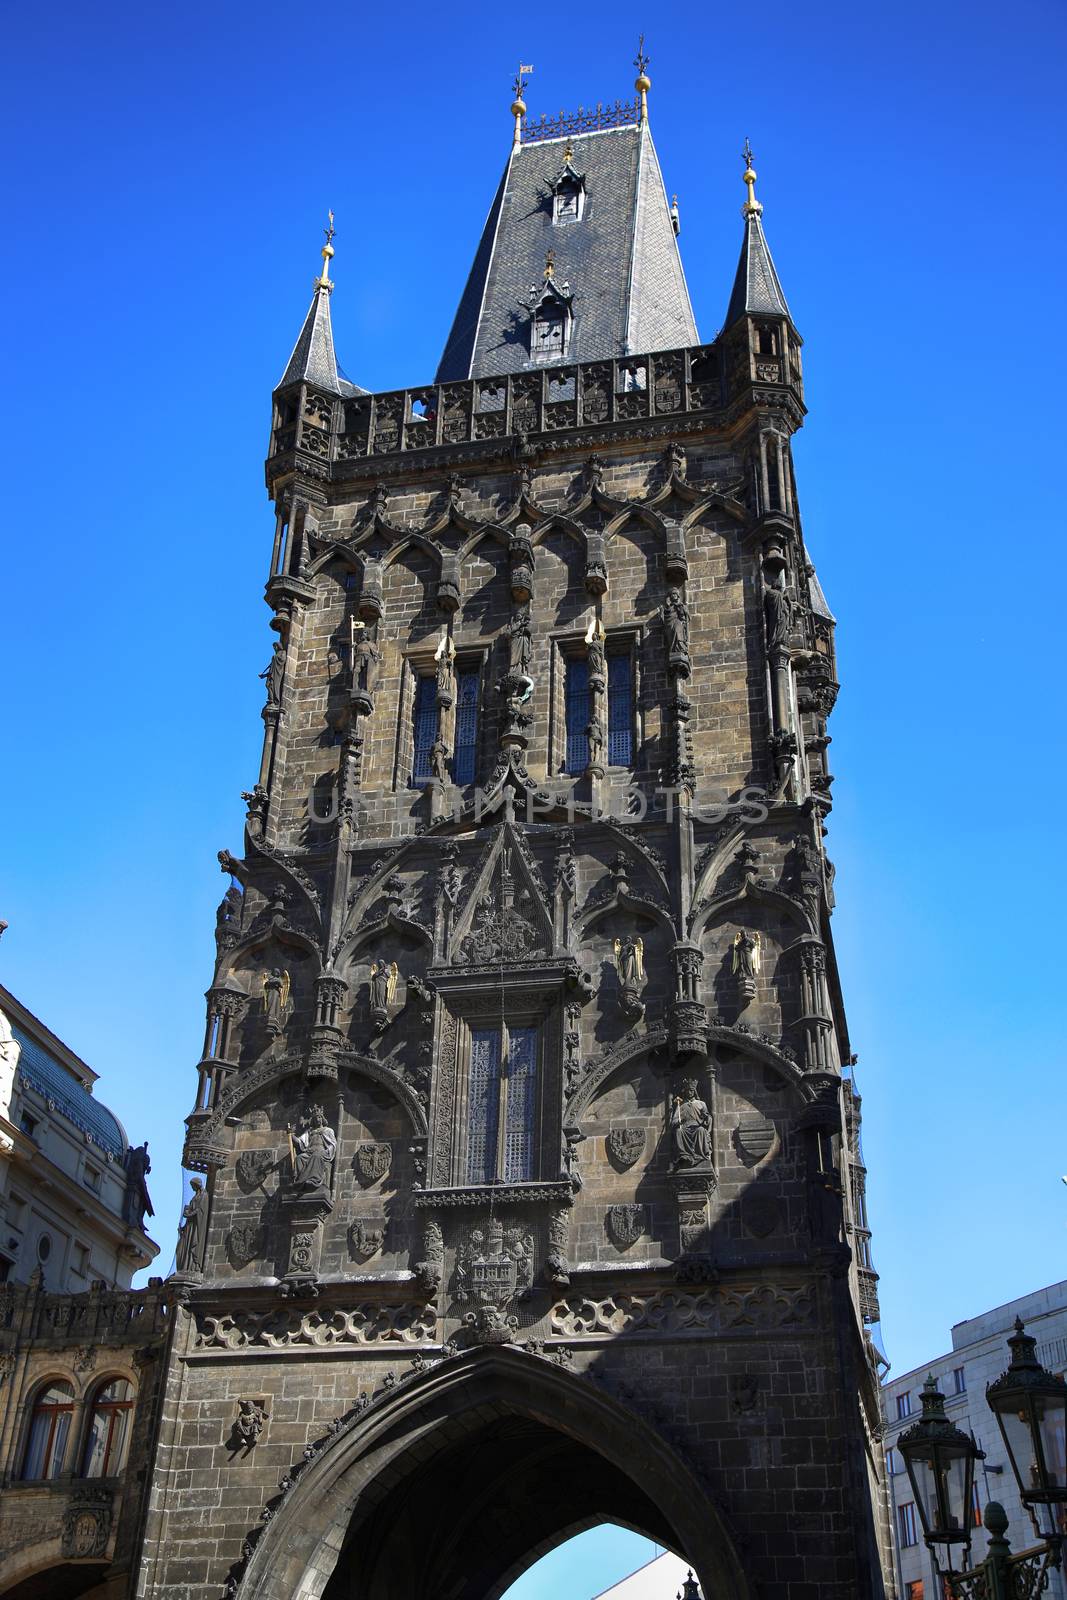 The Powder Tower is a high medieval Gothic tower in Prague, Czech Republic